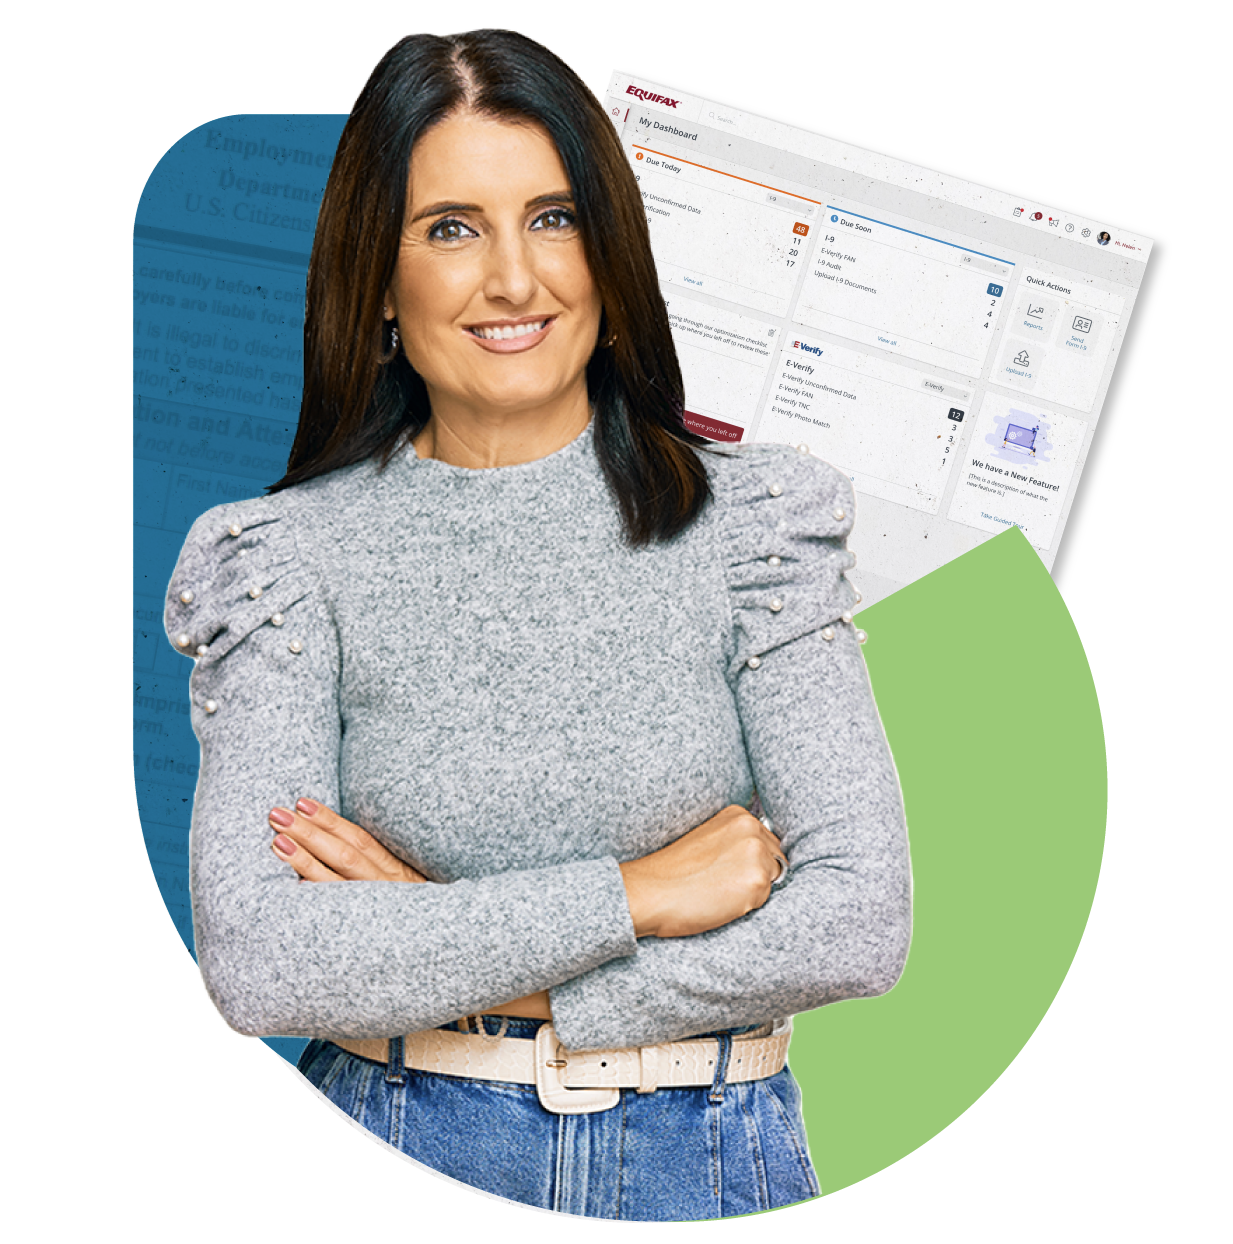 A brunette woman in a grey sweater with silver hoop earrings standing with her arms crossed smiling directly into the camera. In the background, there is a screenshot of the Equifax dashboard.